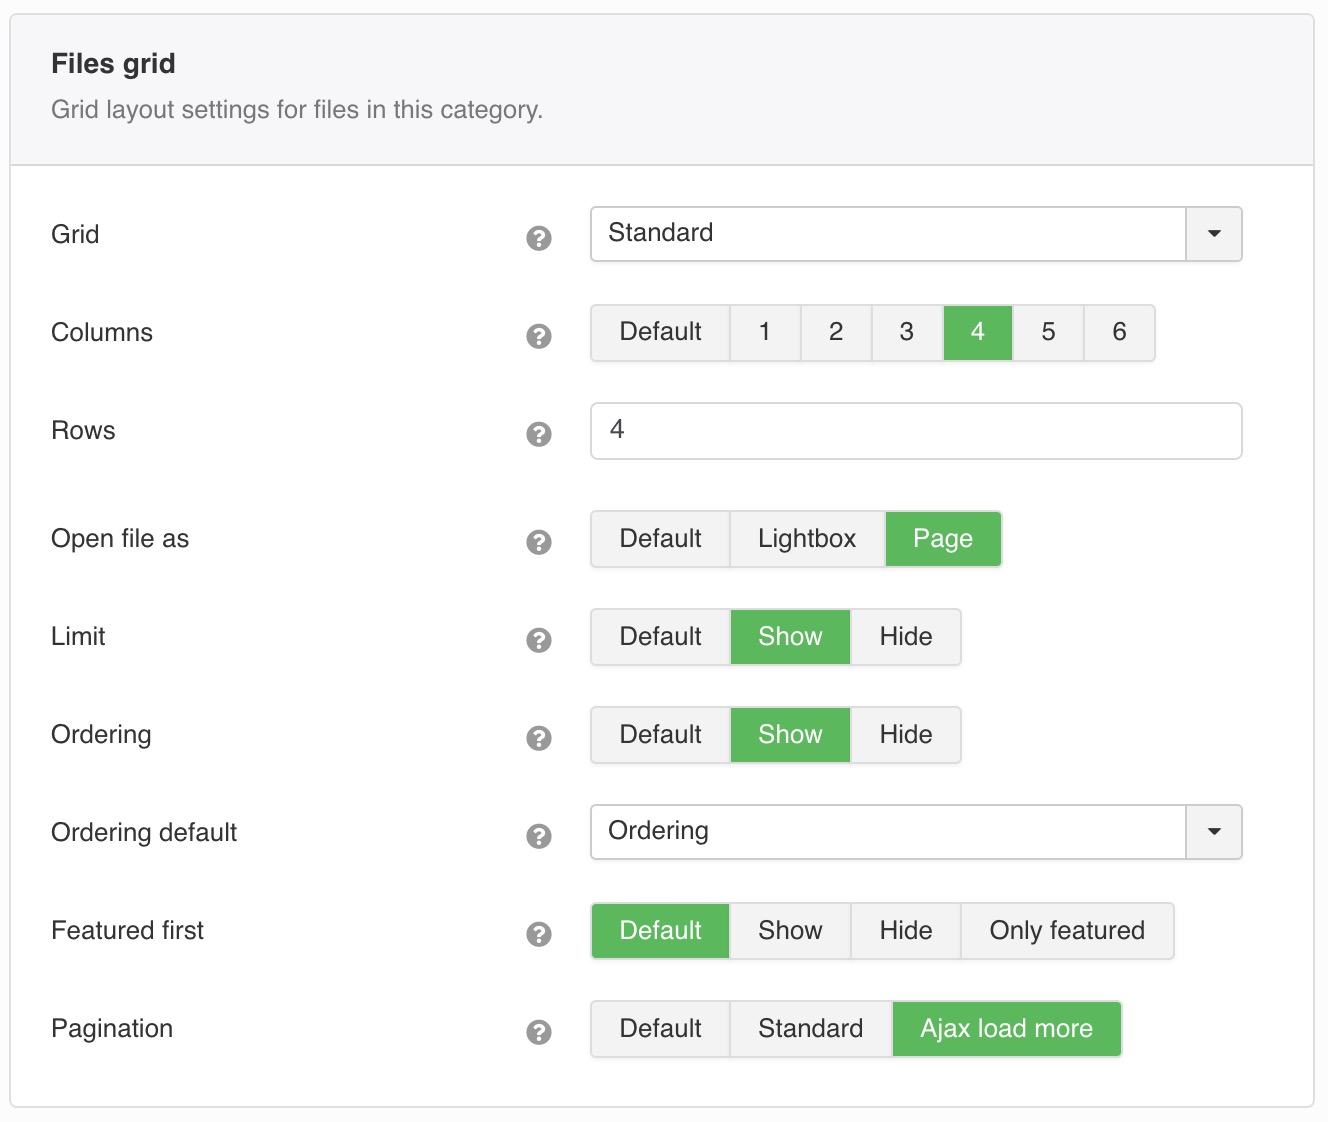 Grid layout settings for files in this category.